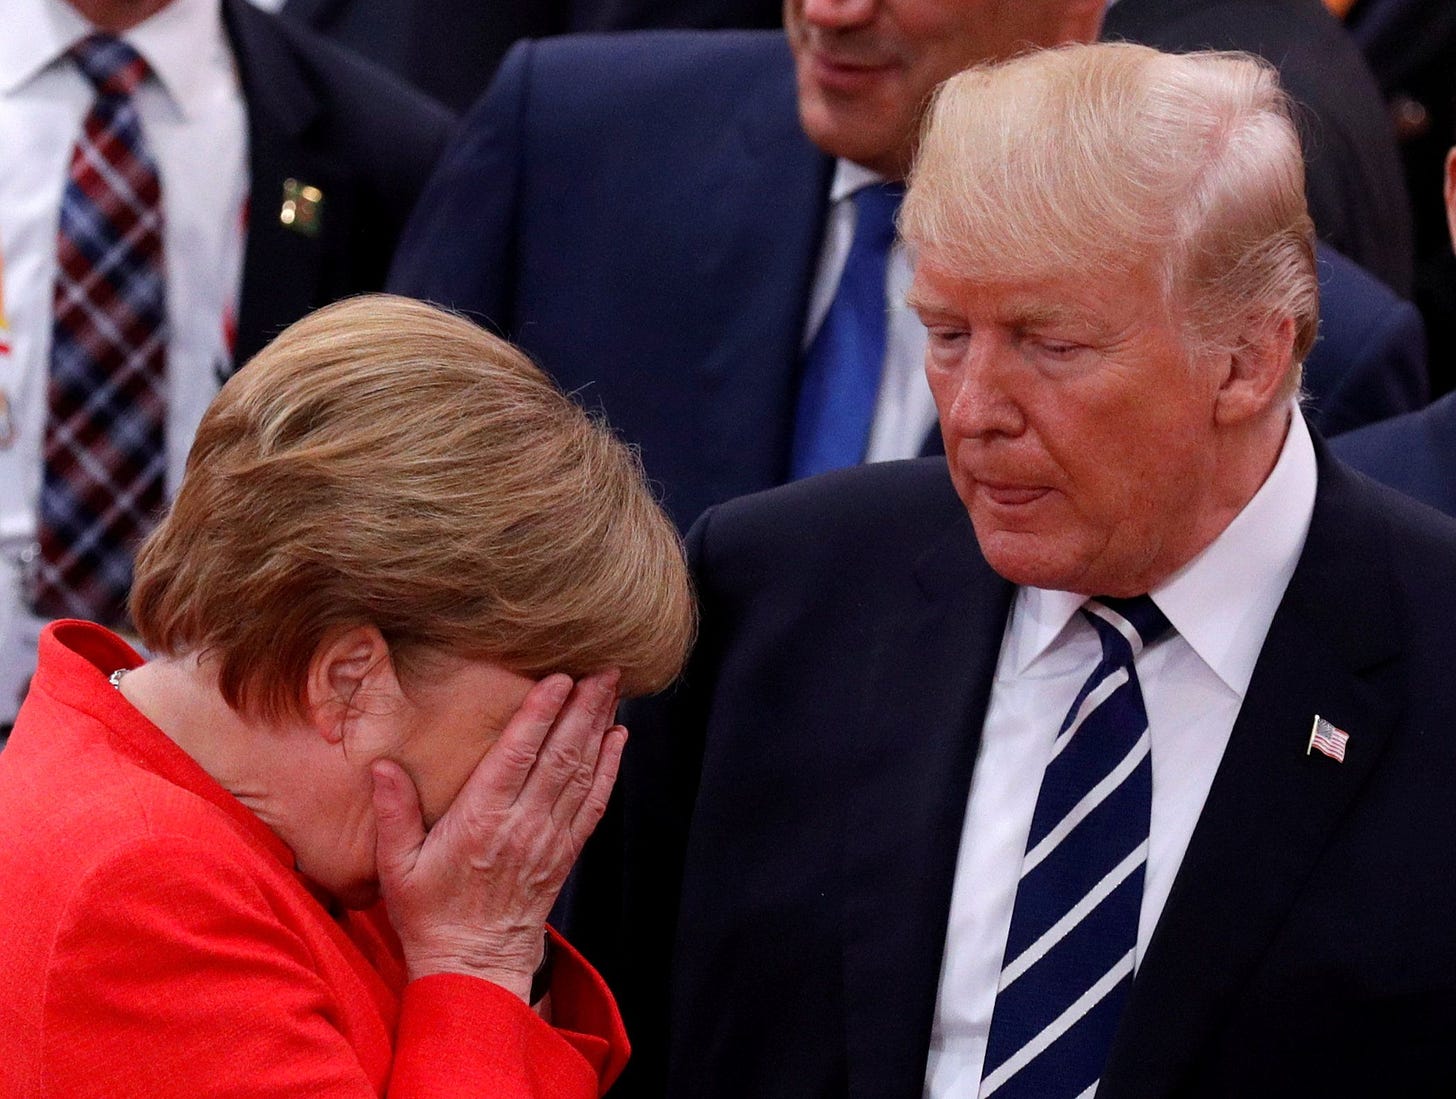 Merkel: Trump 'Even Made a Contribution' on Climate Change Discussion ...